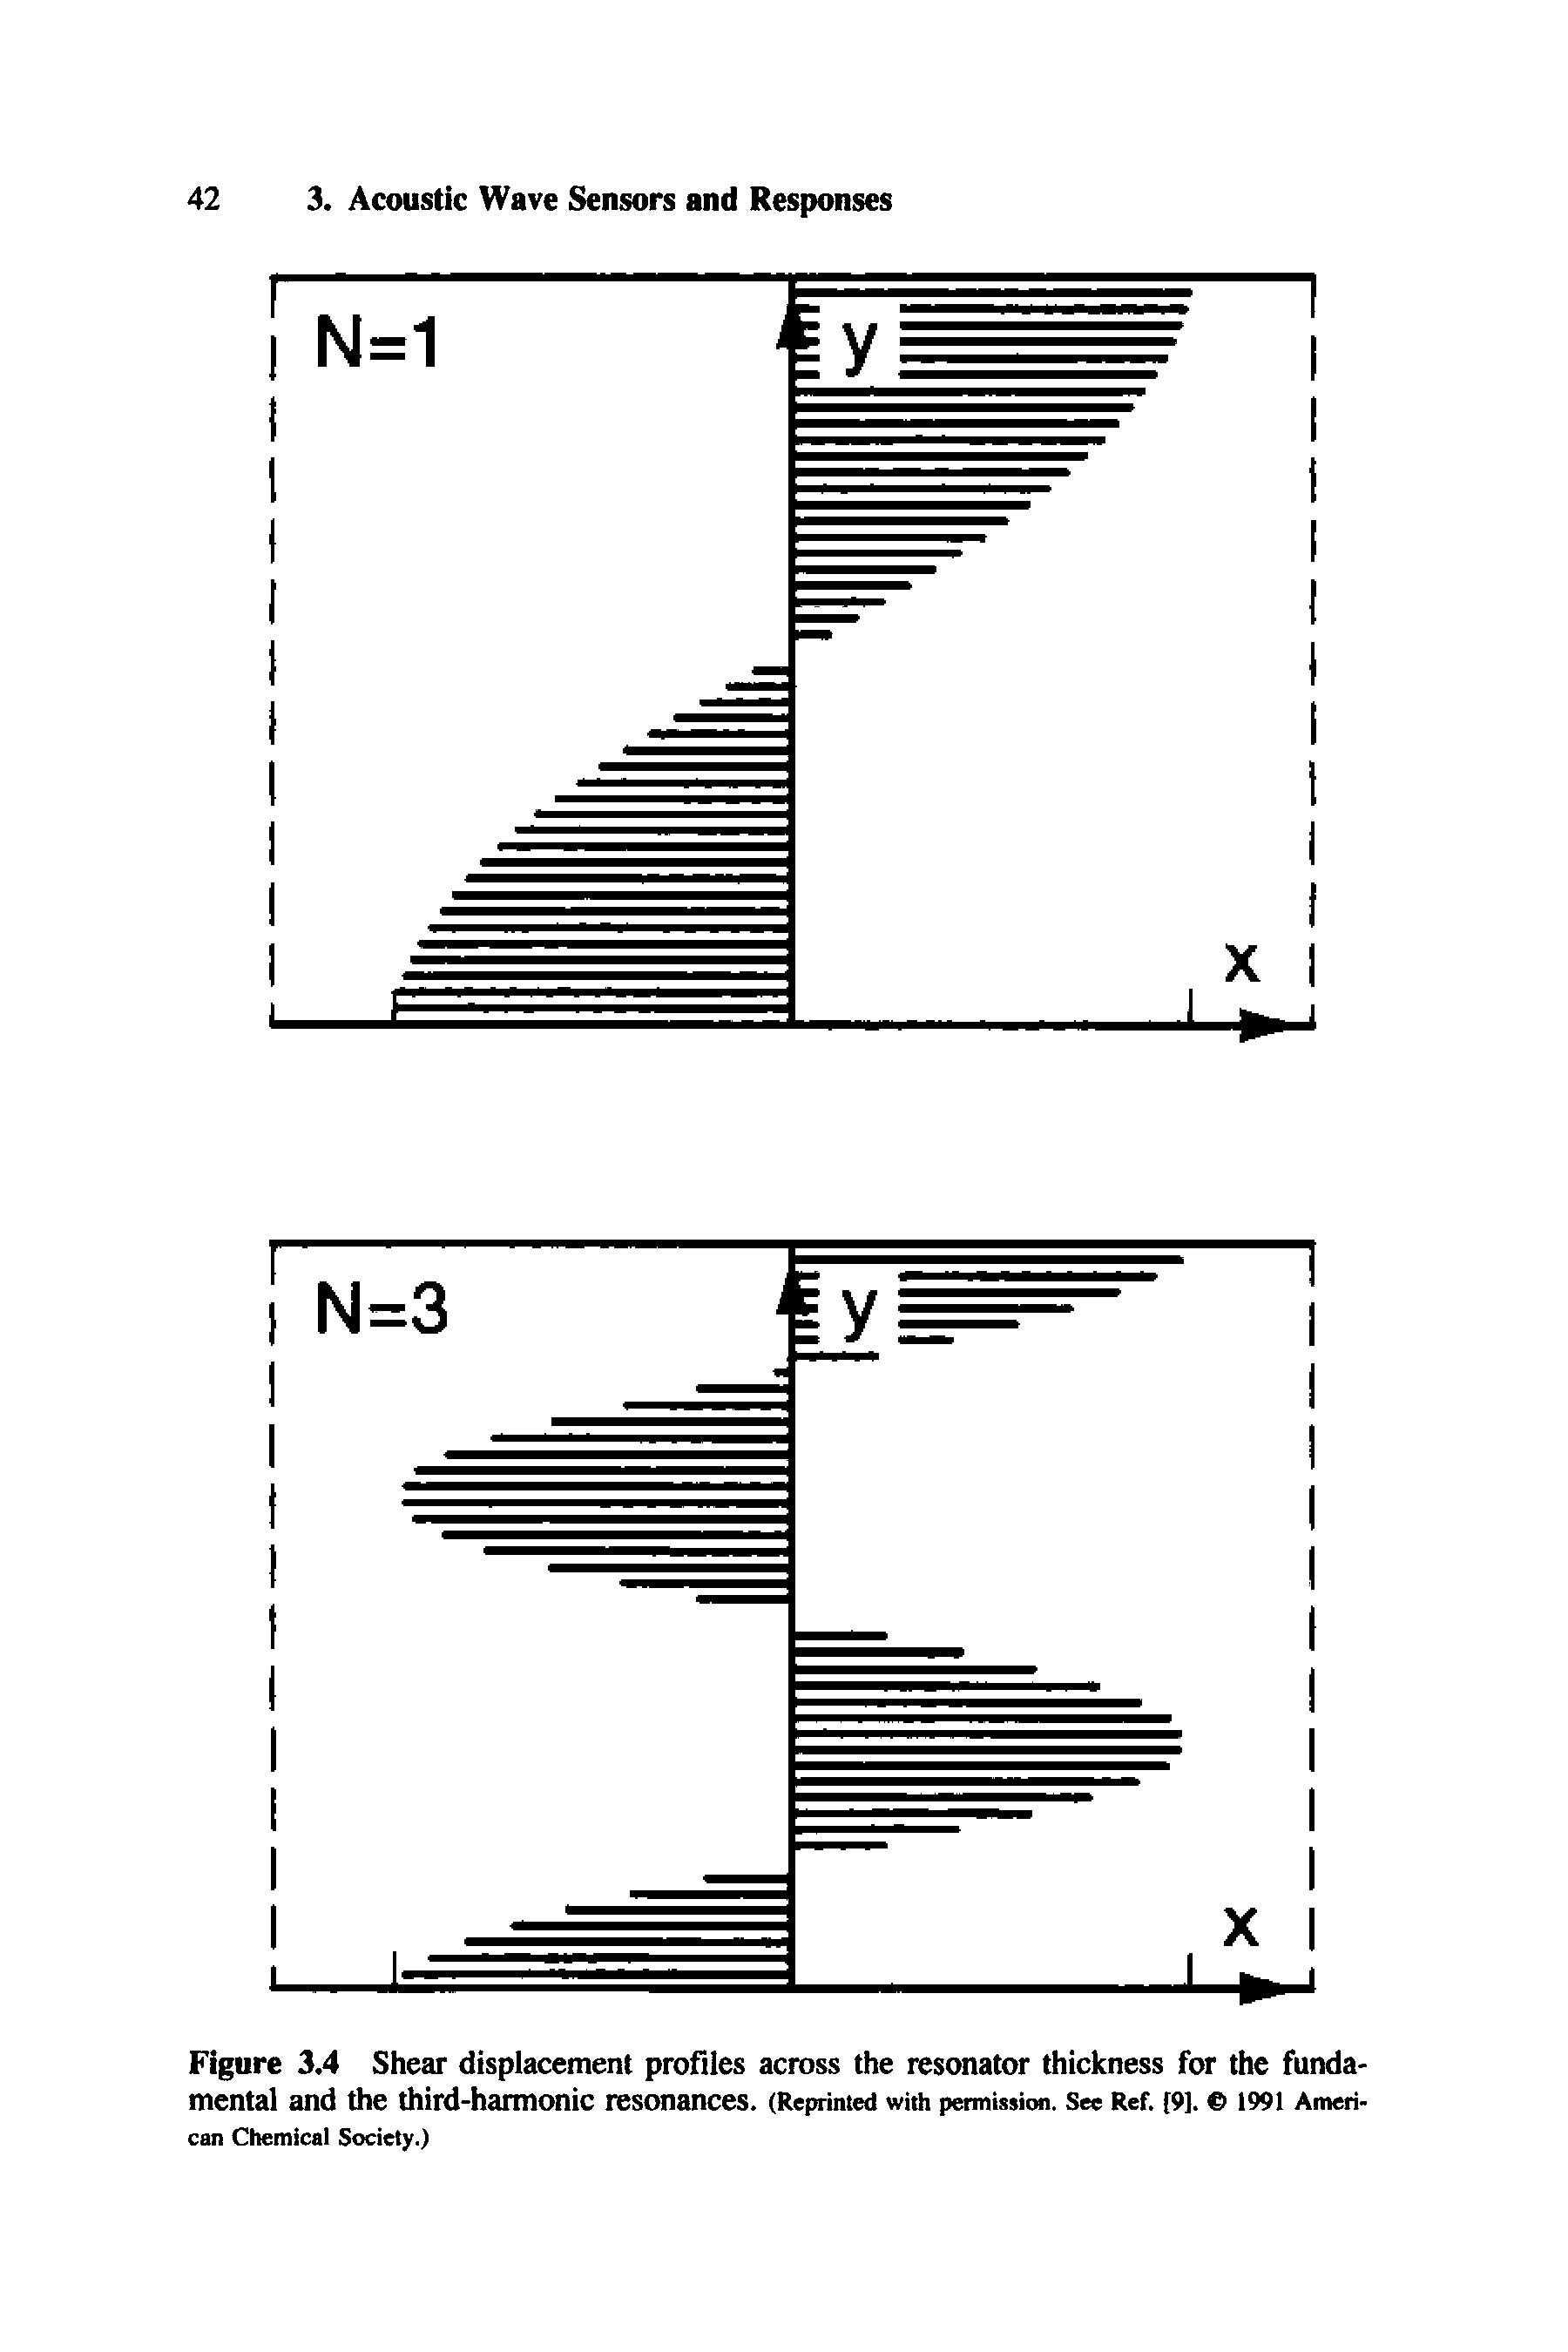 Figure 3.4 Shear displacement profiles across the resonator thickness for the fundamental and the third-harmonic resonances. (Reprinted with permisuon. See Ref. [9]. > 1991 Ameri-...